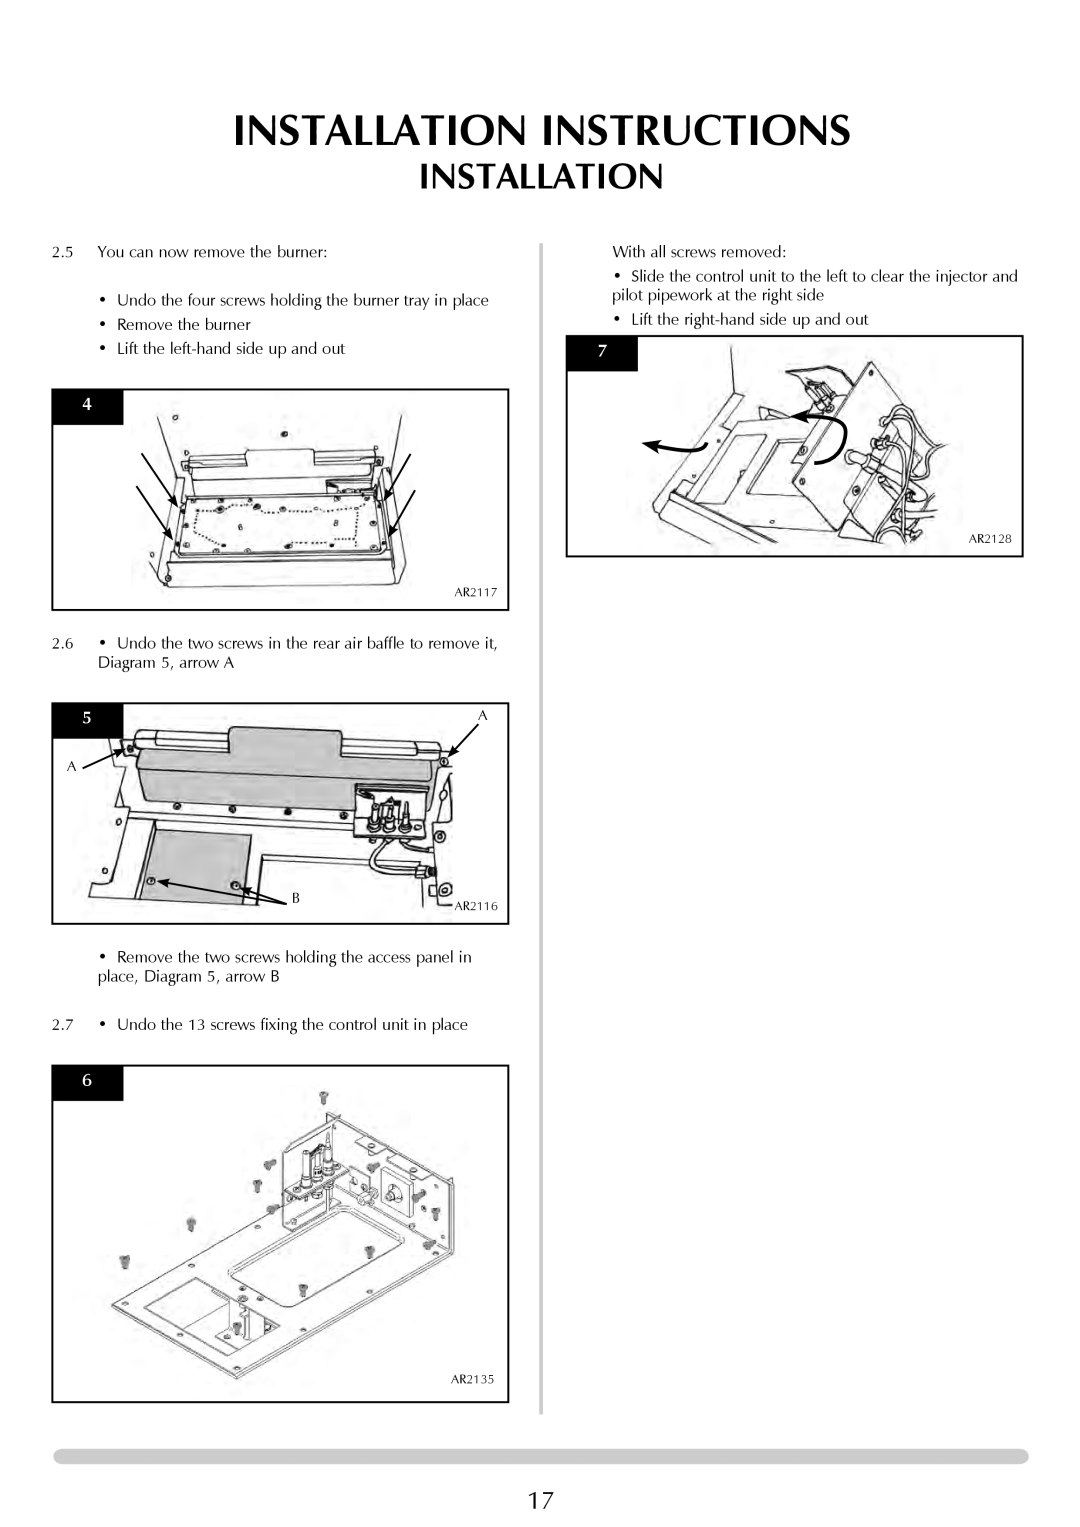 Stovax Studio 22 manual Installation Instructions, 2.5You can now remove the burner 